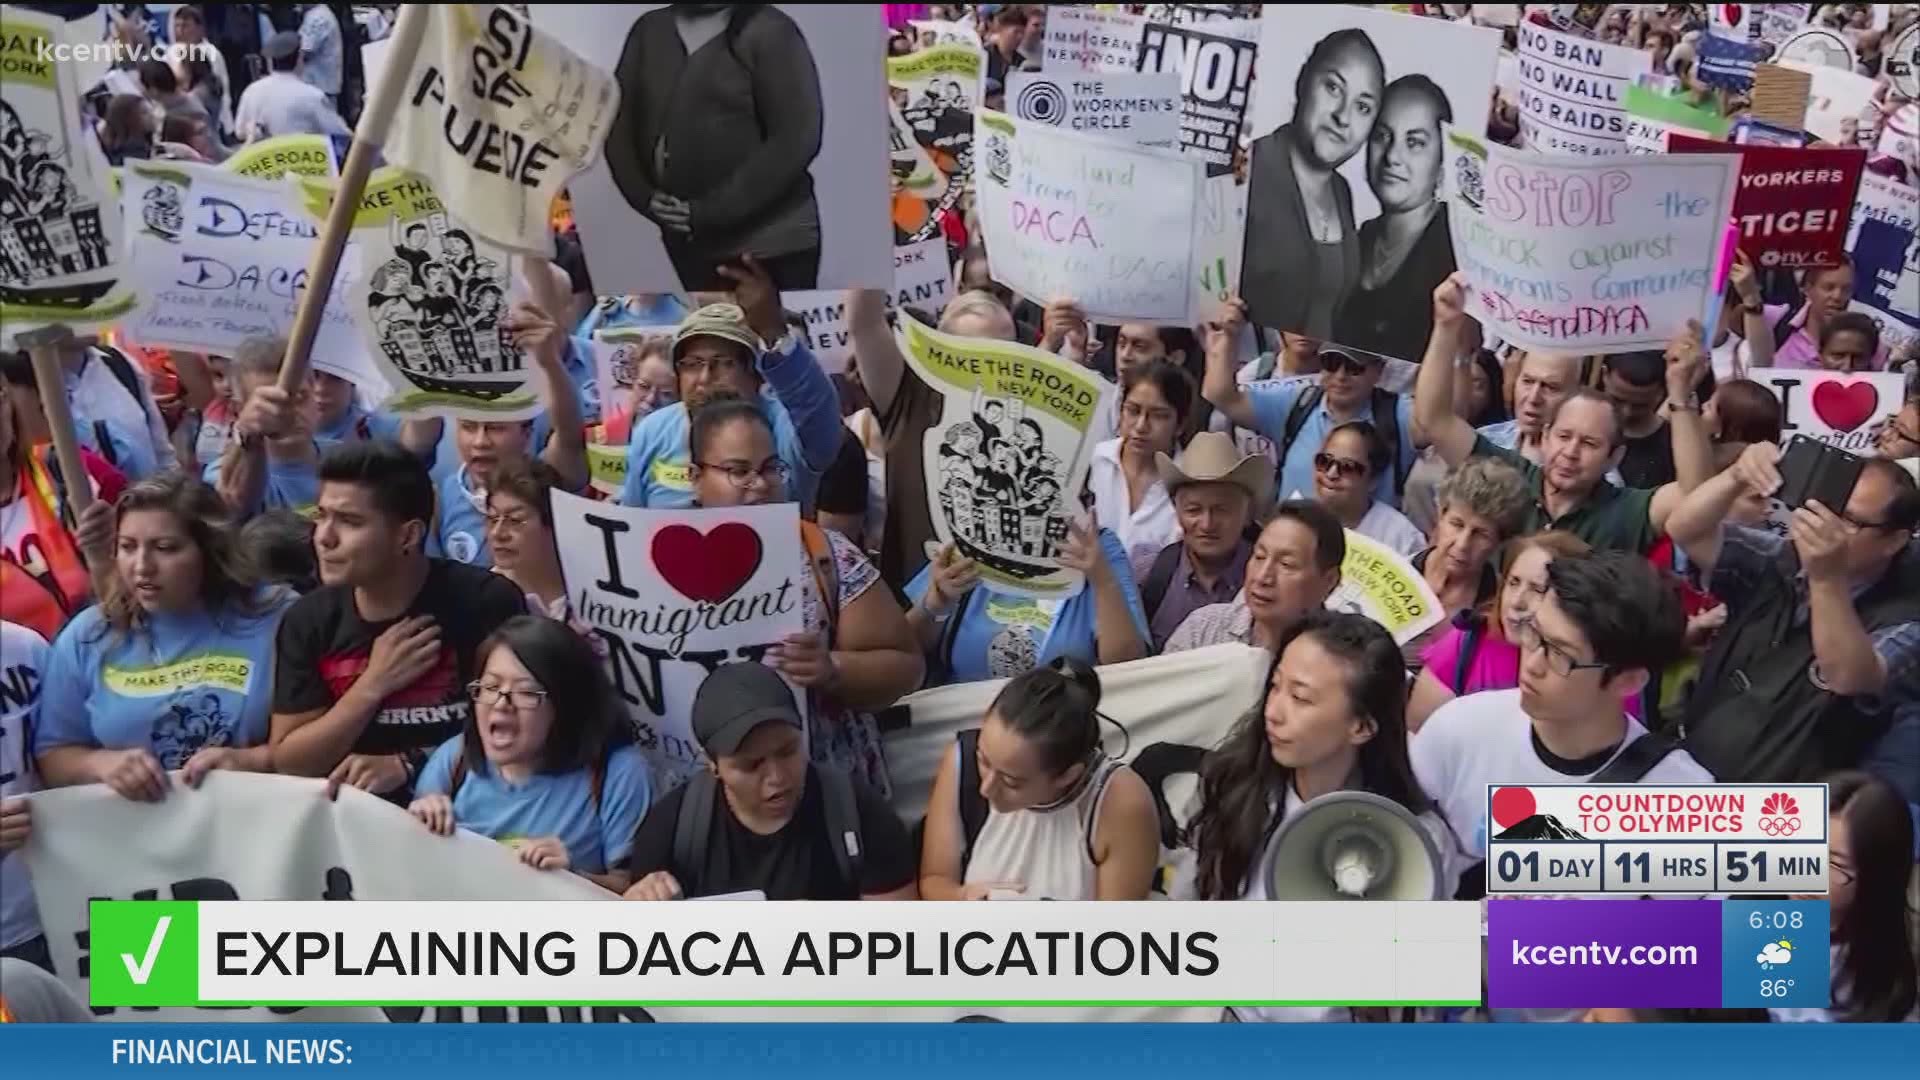 More than 50,000 DACA applicants are waiting for their applications to be approved. They’ll have to keep waiting after a judge ruled the program unconstitutional.